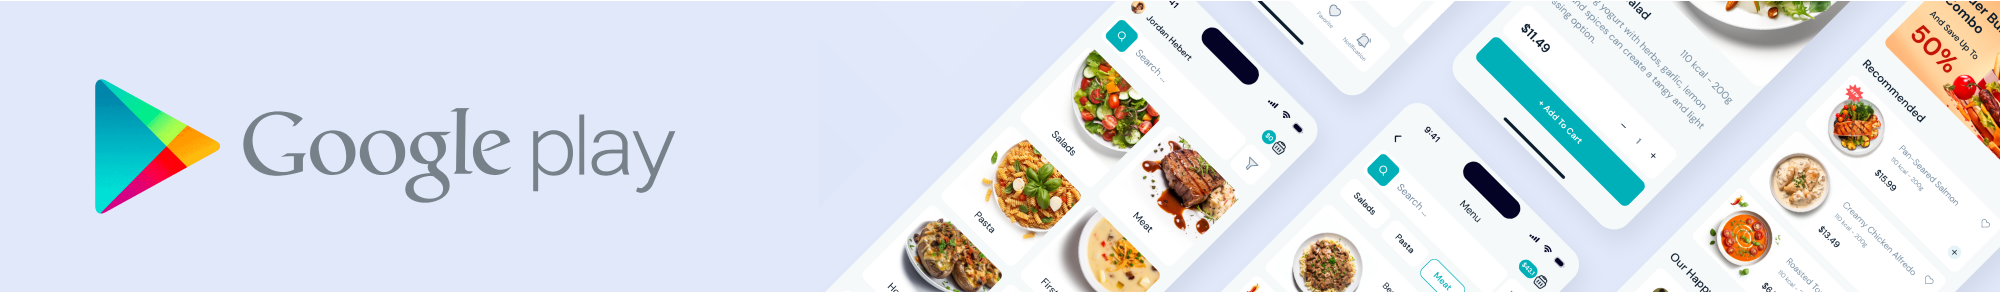 DineHub - Restaurant Food Delivery App | CLI 0.72.4 | TypeScript | Redux Store | Orchid Admin Panel - 1